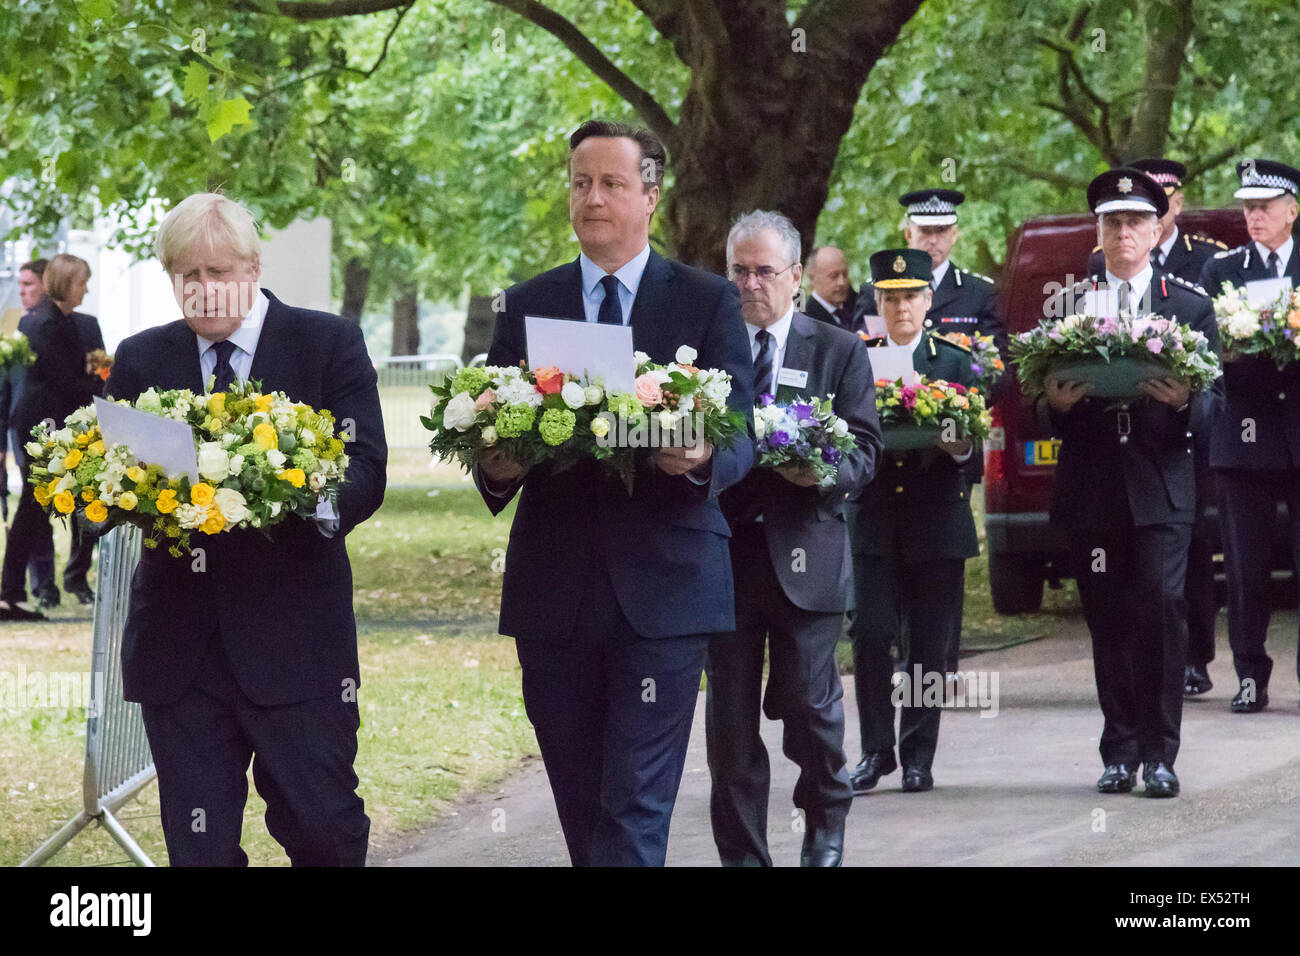 Hyde Park, London, July7th 2015. The Mayor of London Boris Johnson and other senior political figures, the Commissioners for transport and policing in the capital, as well as senior representatives of the emergency services lay wreaths at the 7/7 memorial in Hyde Park. PICTURED: Mayor of London Boris Johnson and Prime Minister David Cameron lead the sombre procession of senior politicians and representatives of the emergency services towards the 7/7 Memorial monument. Credit:  Paul Davey/Alamy Live News Stock Photo